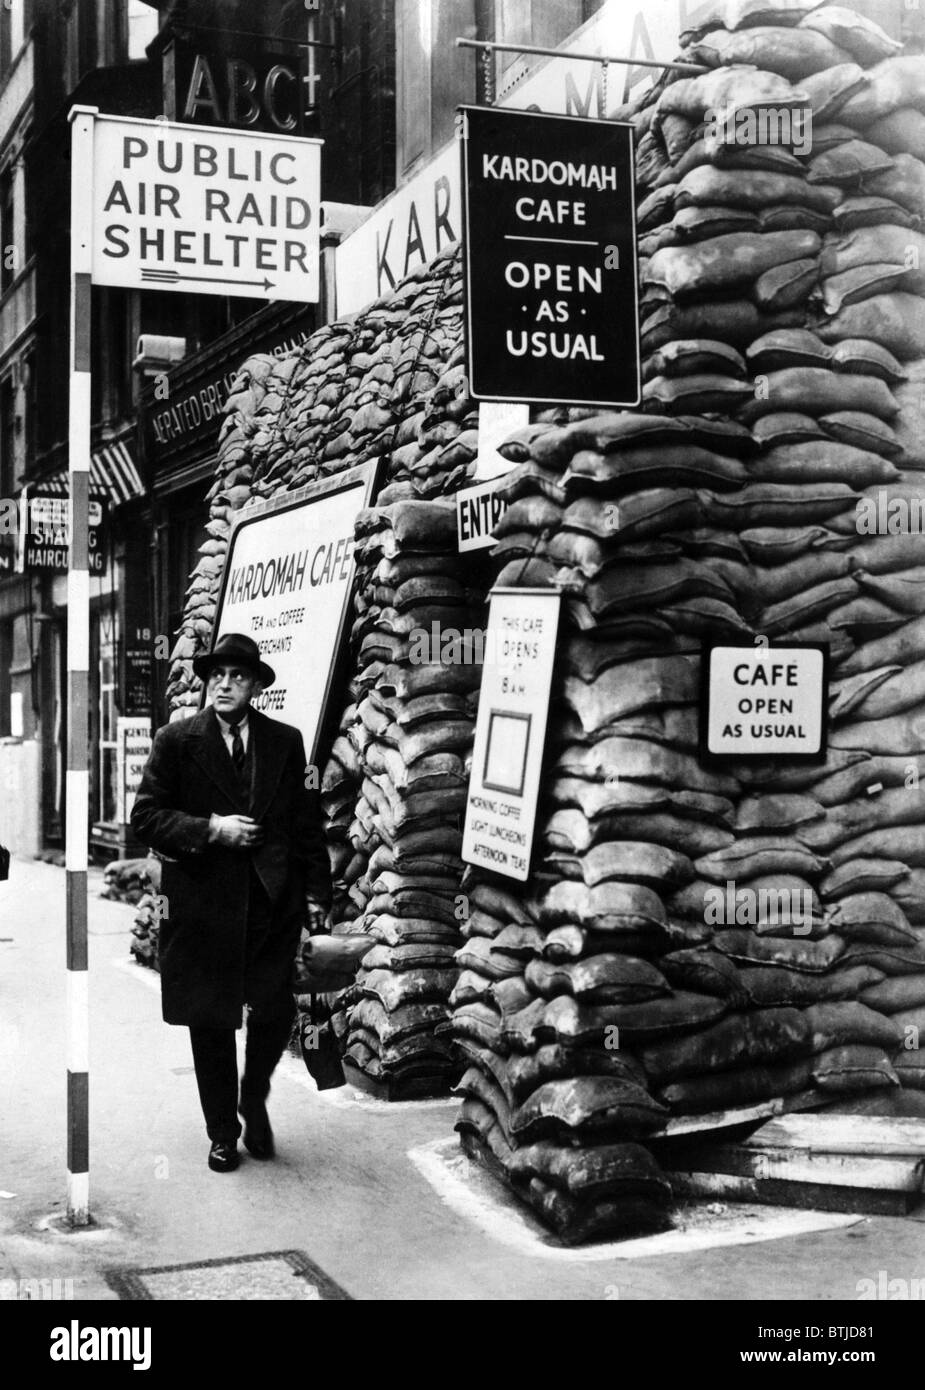 The Kardomah Cafe, outfitted as an air raid shelter as an attraction during wartime, Fleet St, London, England, November 15, 193 Stock Photo